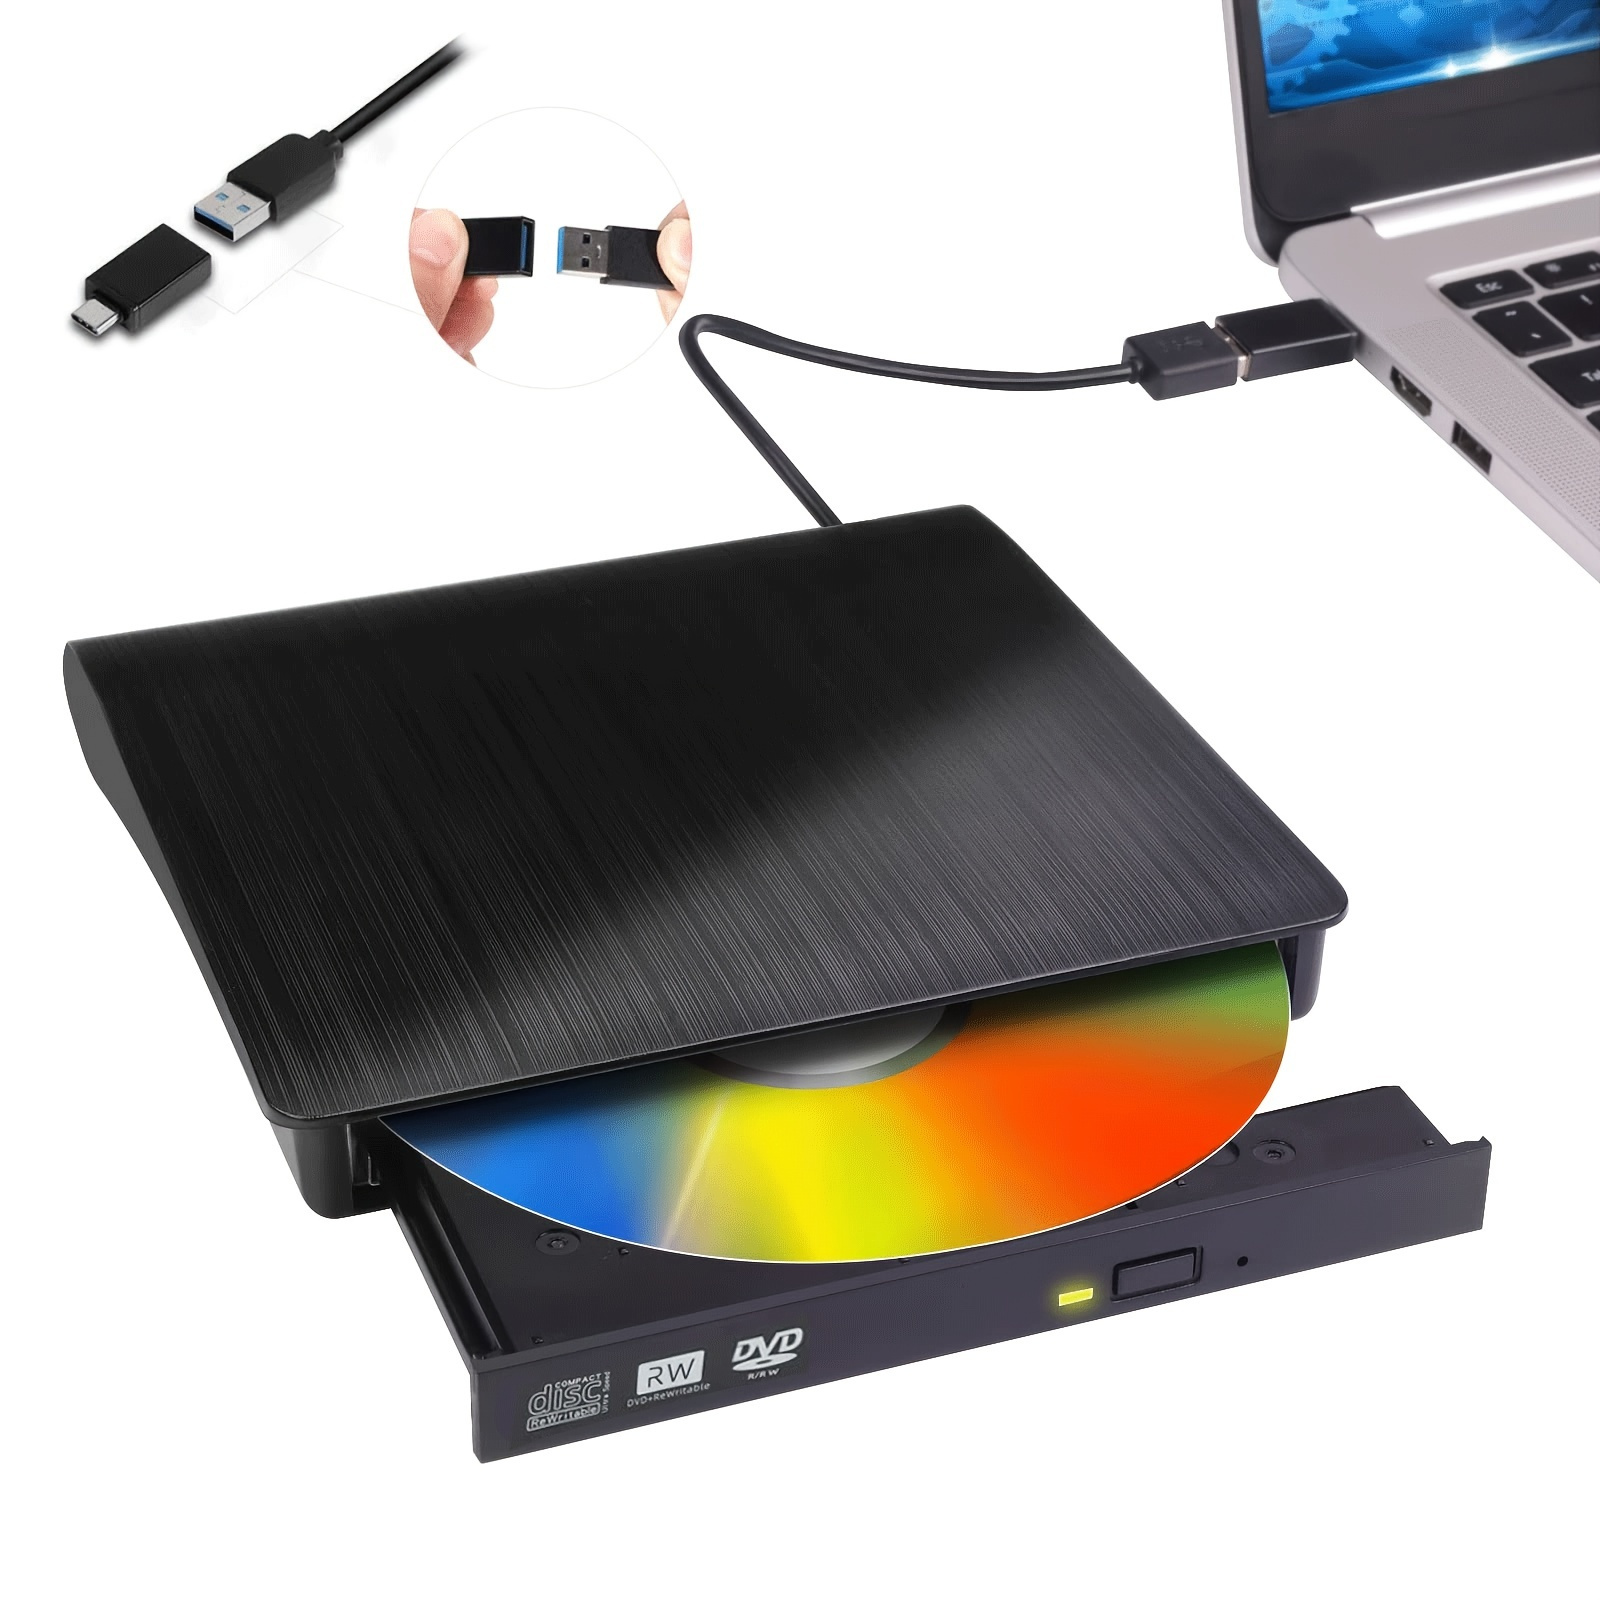 

External Usb 3.0 Type-c Dvd Drive: Portable Dvd Player For Laptop, Cd/dvd +/-rw Burner Reader For Windows, Linux, For Macbook - Perfect Easter Gift!